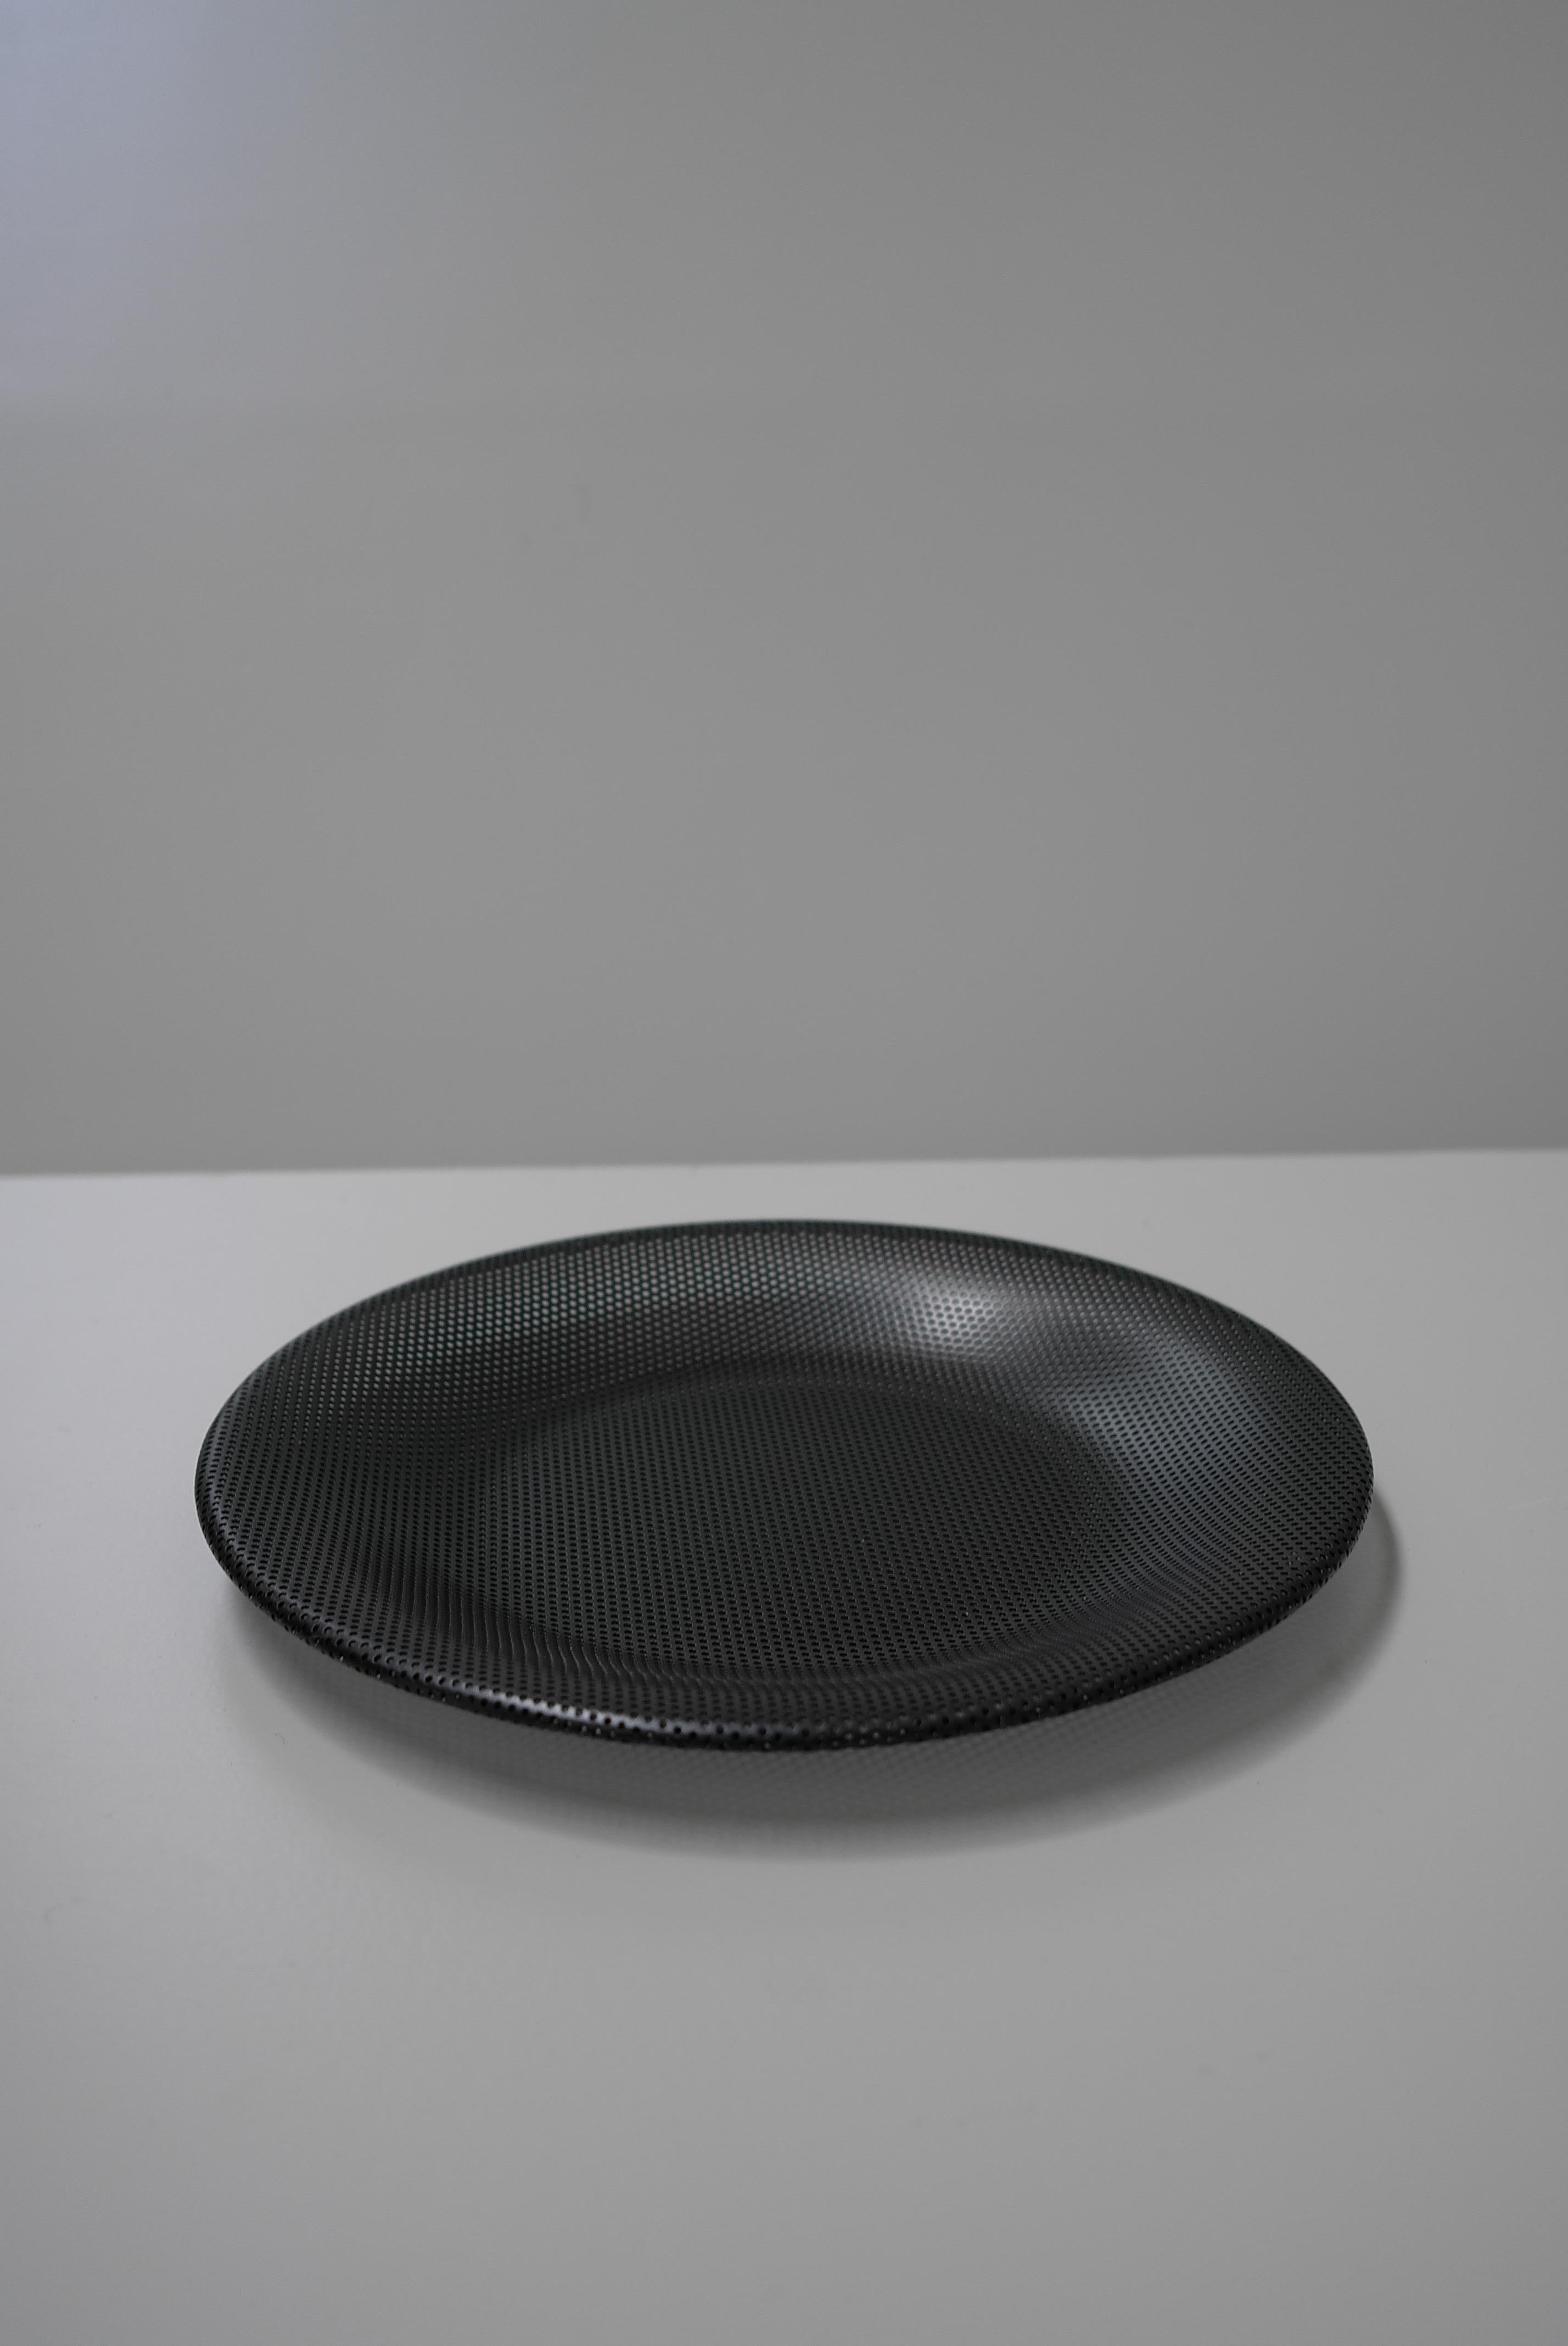 Black metal tray designed by Mathieu Matégot. Manufactured by Ateliers Matégot, France, circa 1950. Lacquered perforated metal.